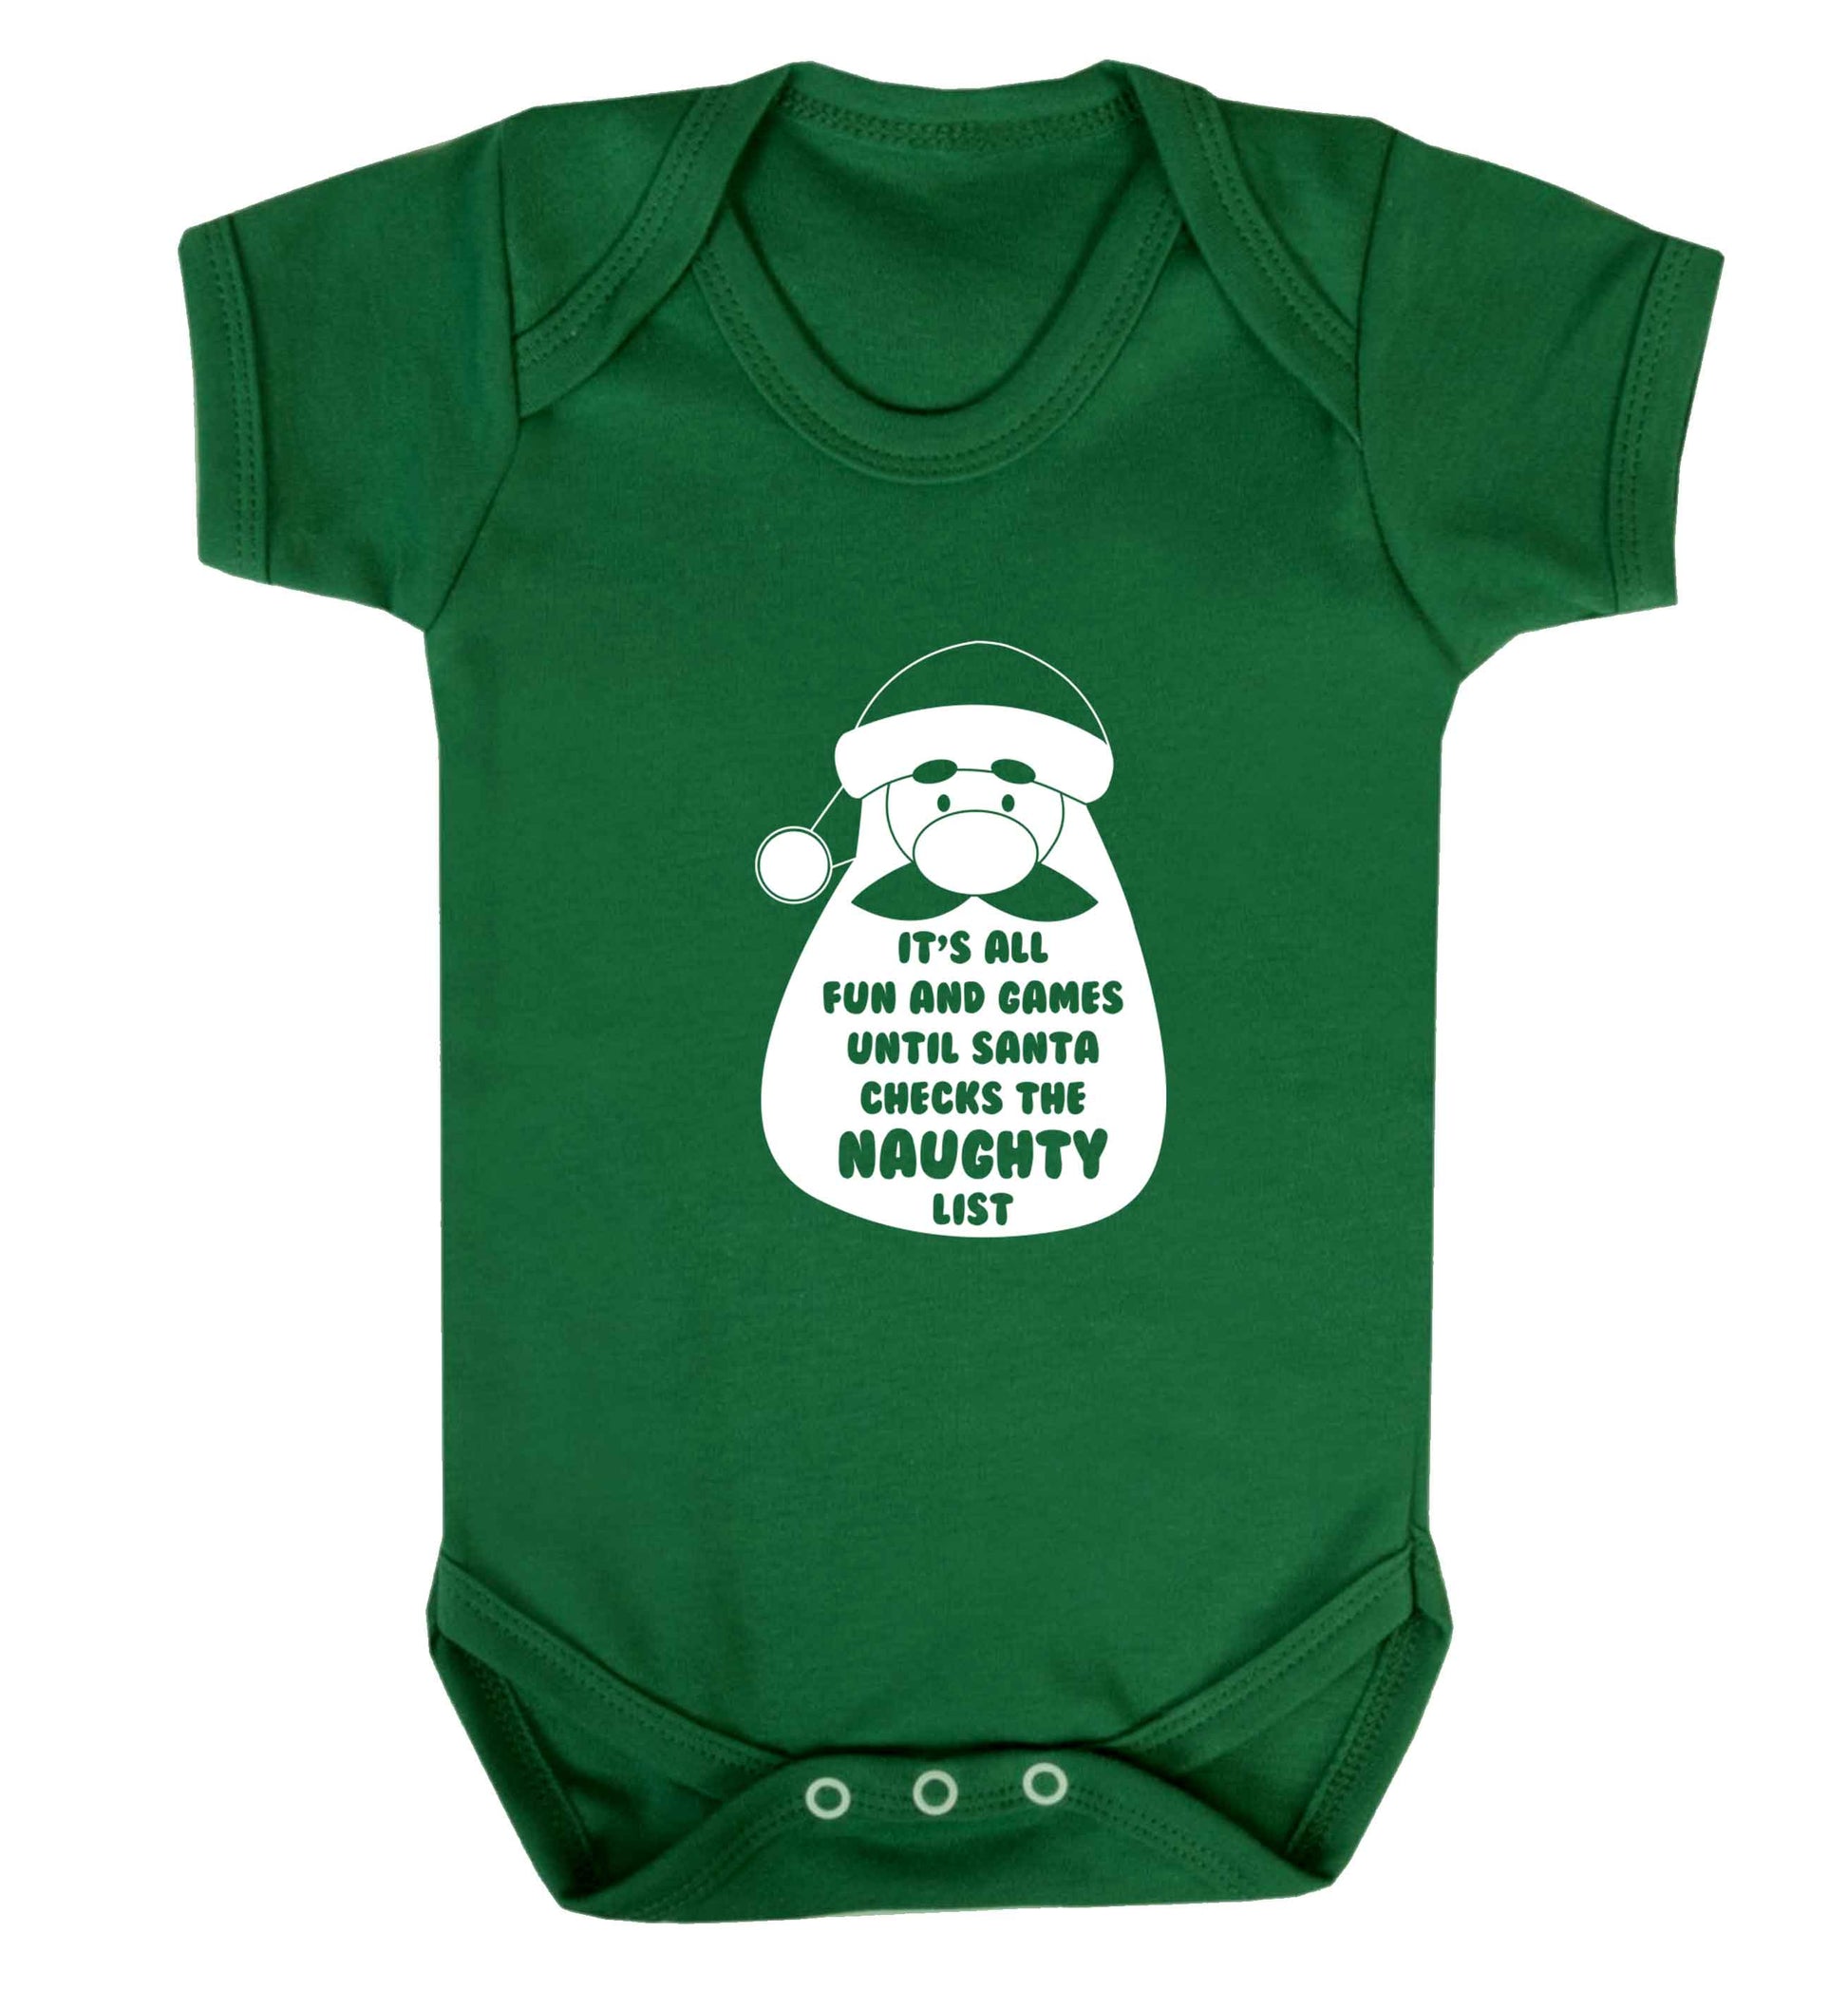 It's all fun and games until Santa checks the naughty list baby vest green 18-24 months